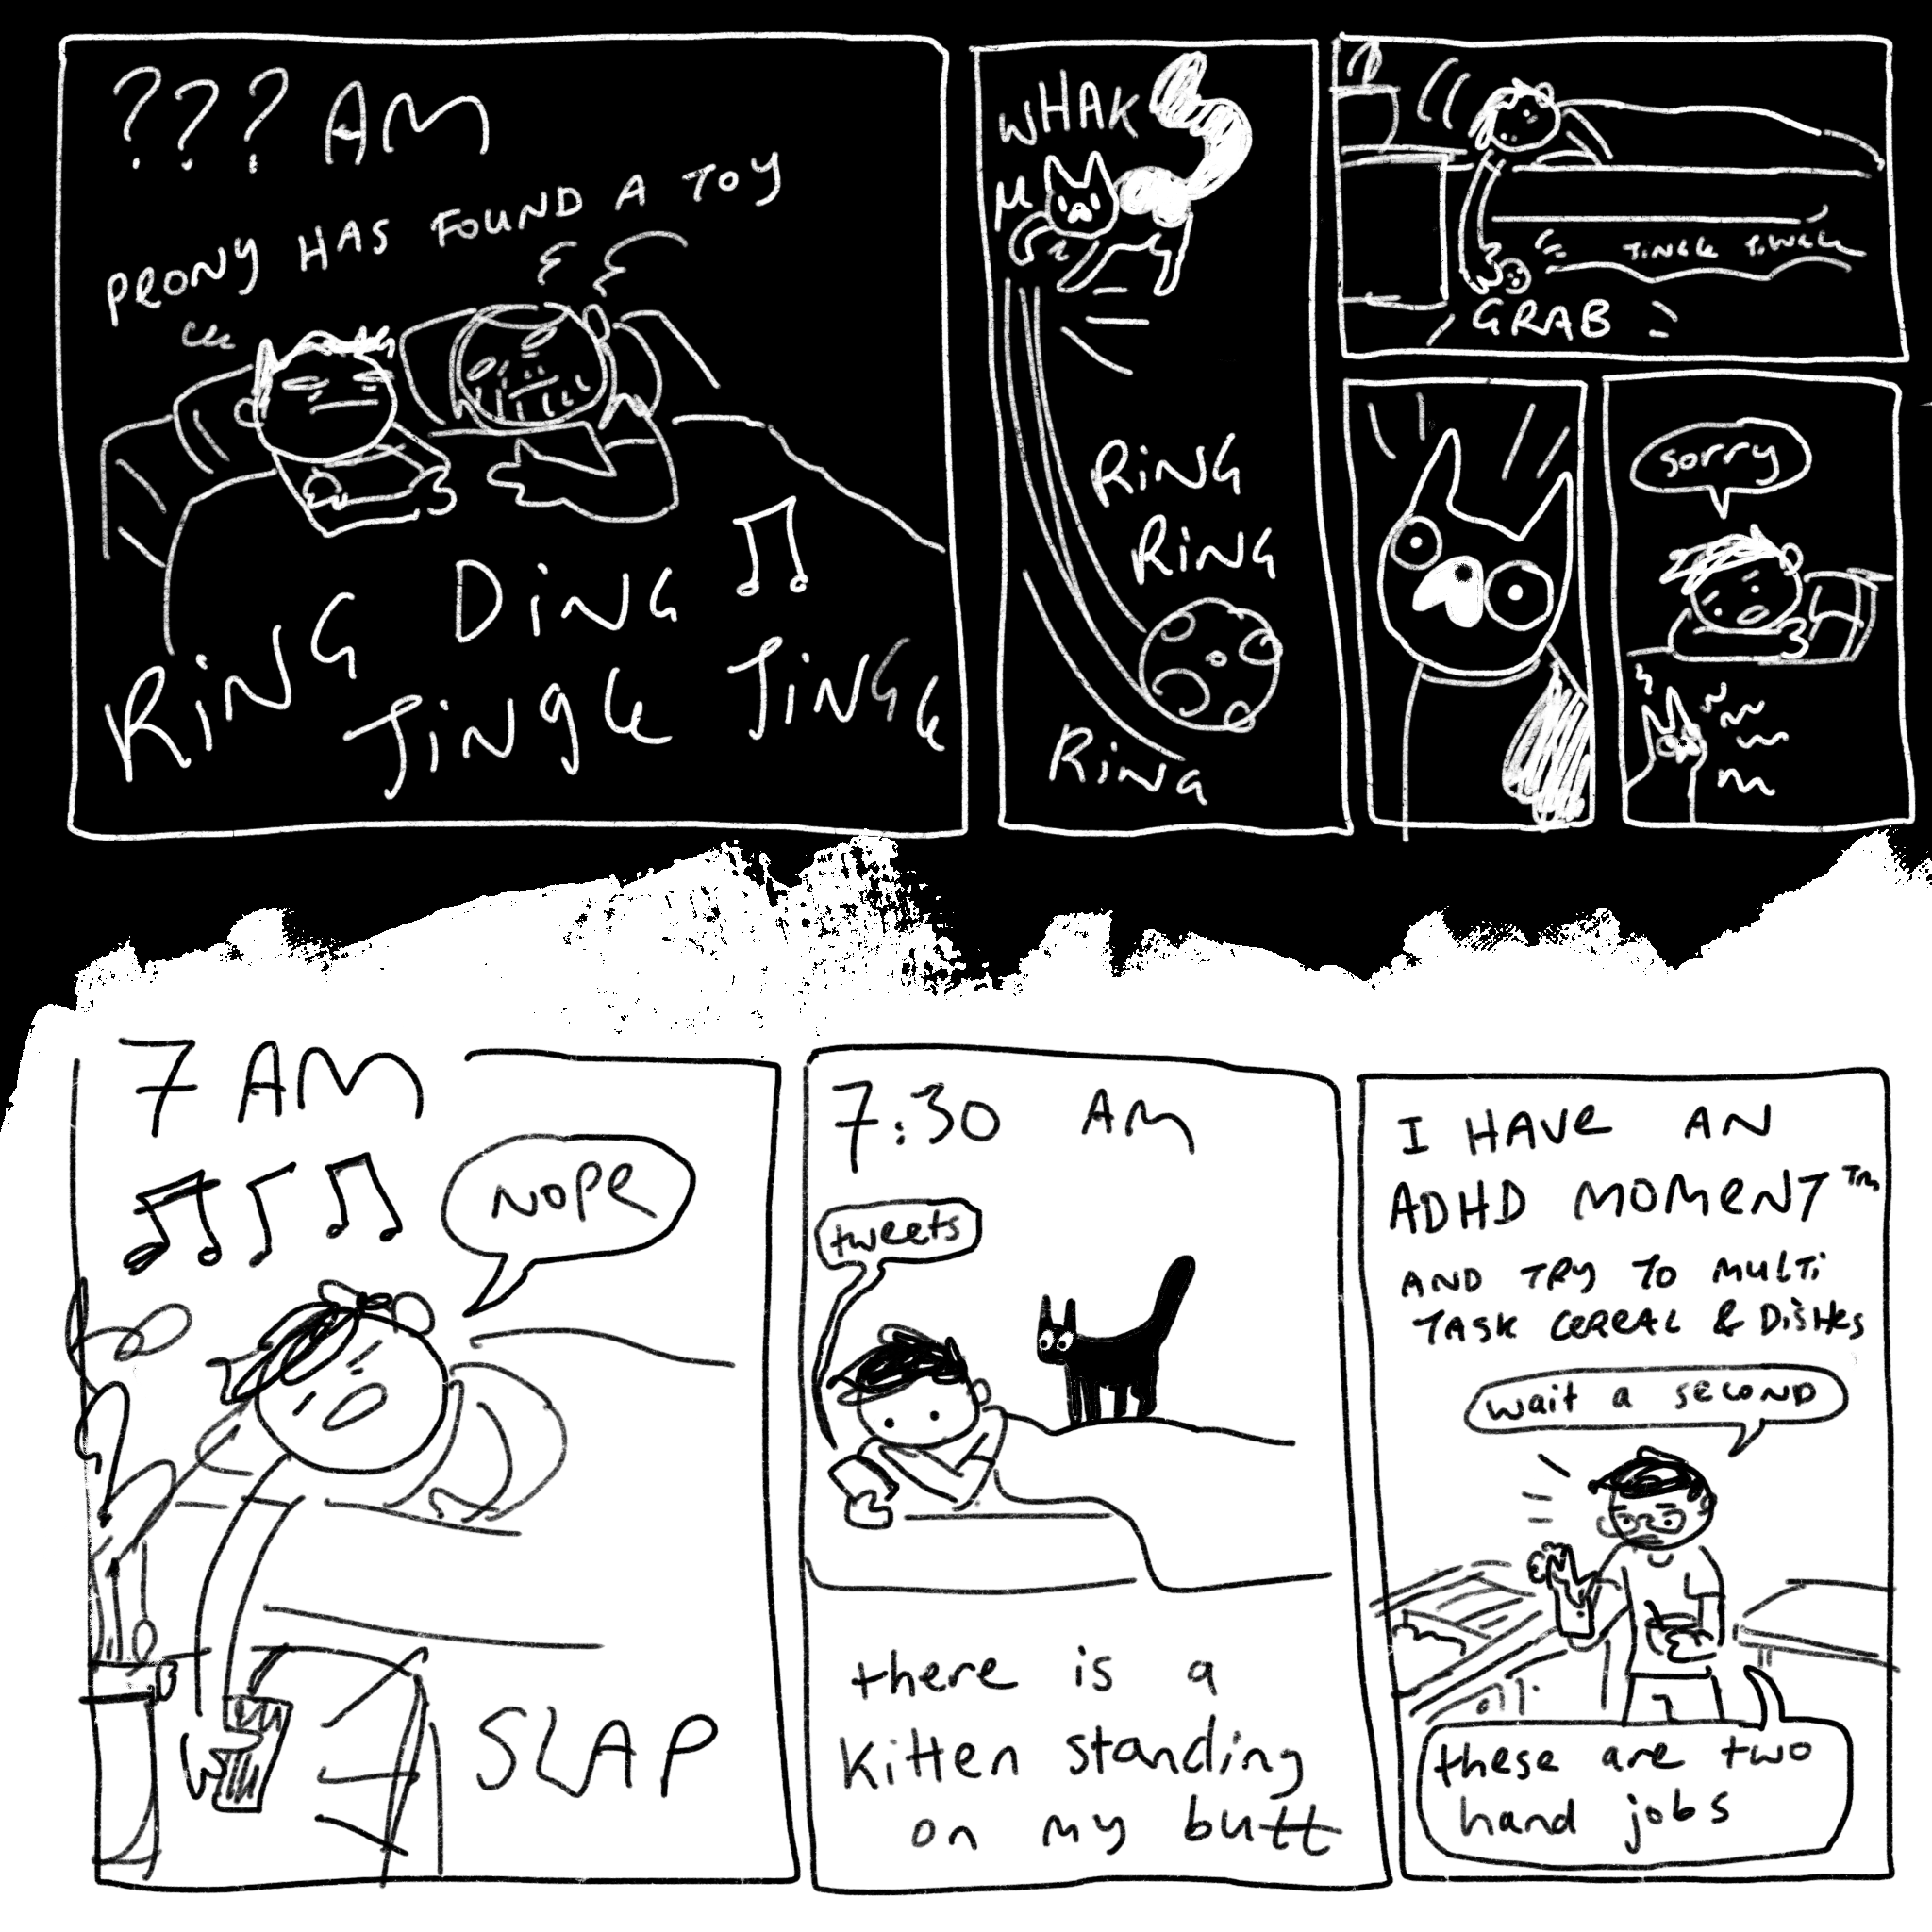 A comic half in black (in the dark) and half in white for the daytime. The dark portion reads, “??? AM, Peony has found a toy.” There’s a loud jingling sound as cartoony drawings of me and my partner look tired and wide awake in bed. The next panel shows Peony, a small cat with an upside down love heart white splotch on her nose, knocks a jingling ball down the side of the bed. I catch it and hide it, and when she looks offended I just say, “sorry.” “7 am.” I slap my alarm and say “nope”, cutting the sound off. “7:30 am” I am looking at my phone (it reads Tweets) and a small black kitten sits on the bed. Text reads, “there is a kitten standing on my butt.” The last panel says “I have an ADHD Moment TM, and try to multi task cereal and dishes.” Standing with a glove on one hand and a bowl of cereal in the other, I say, “Wait a second... these are two-hand jobs.”